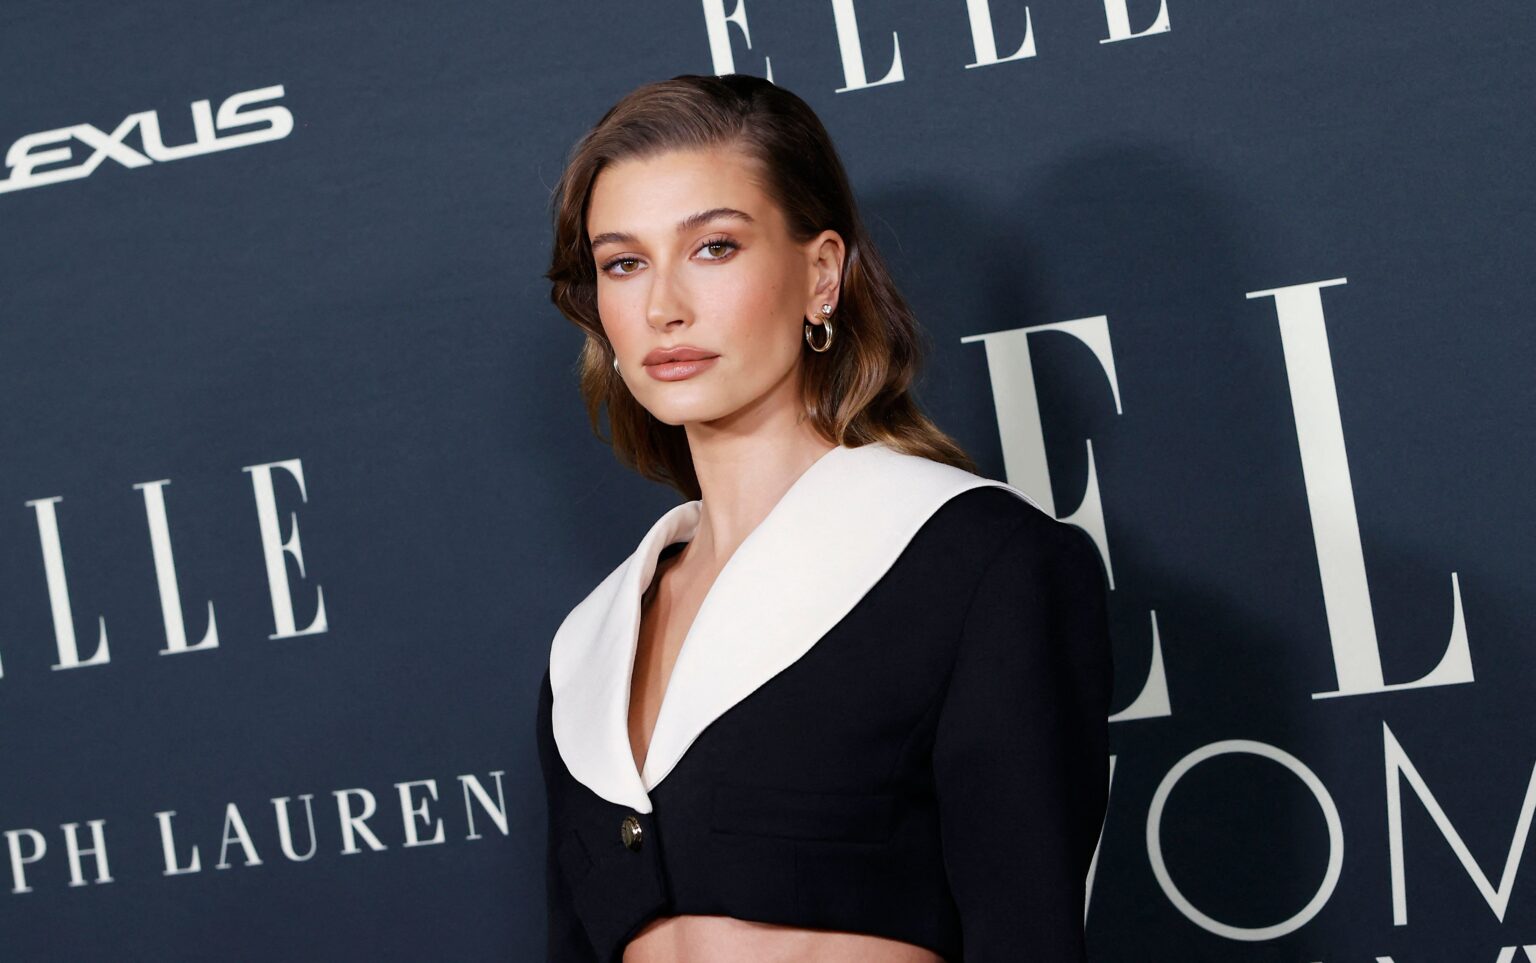 Hailey Bieber forced to insist she’s not pregnant again as she opens up on ovarian cyst: ‘Not a baby’